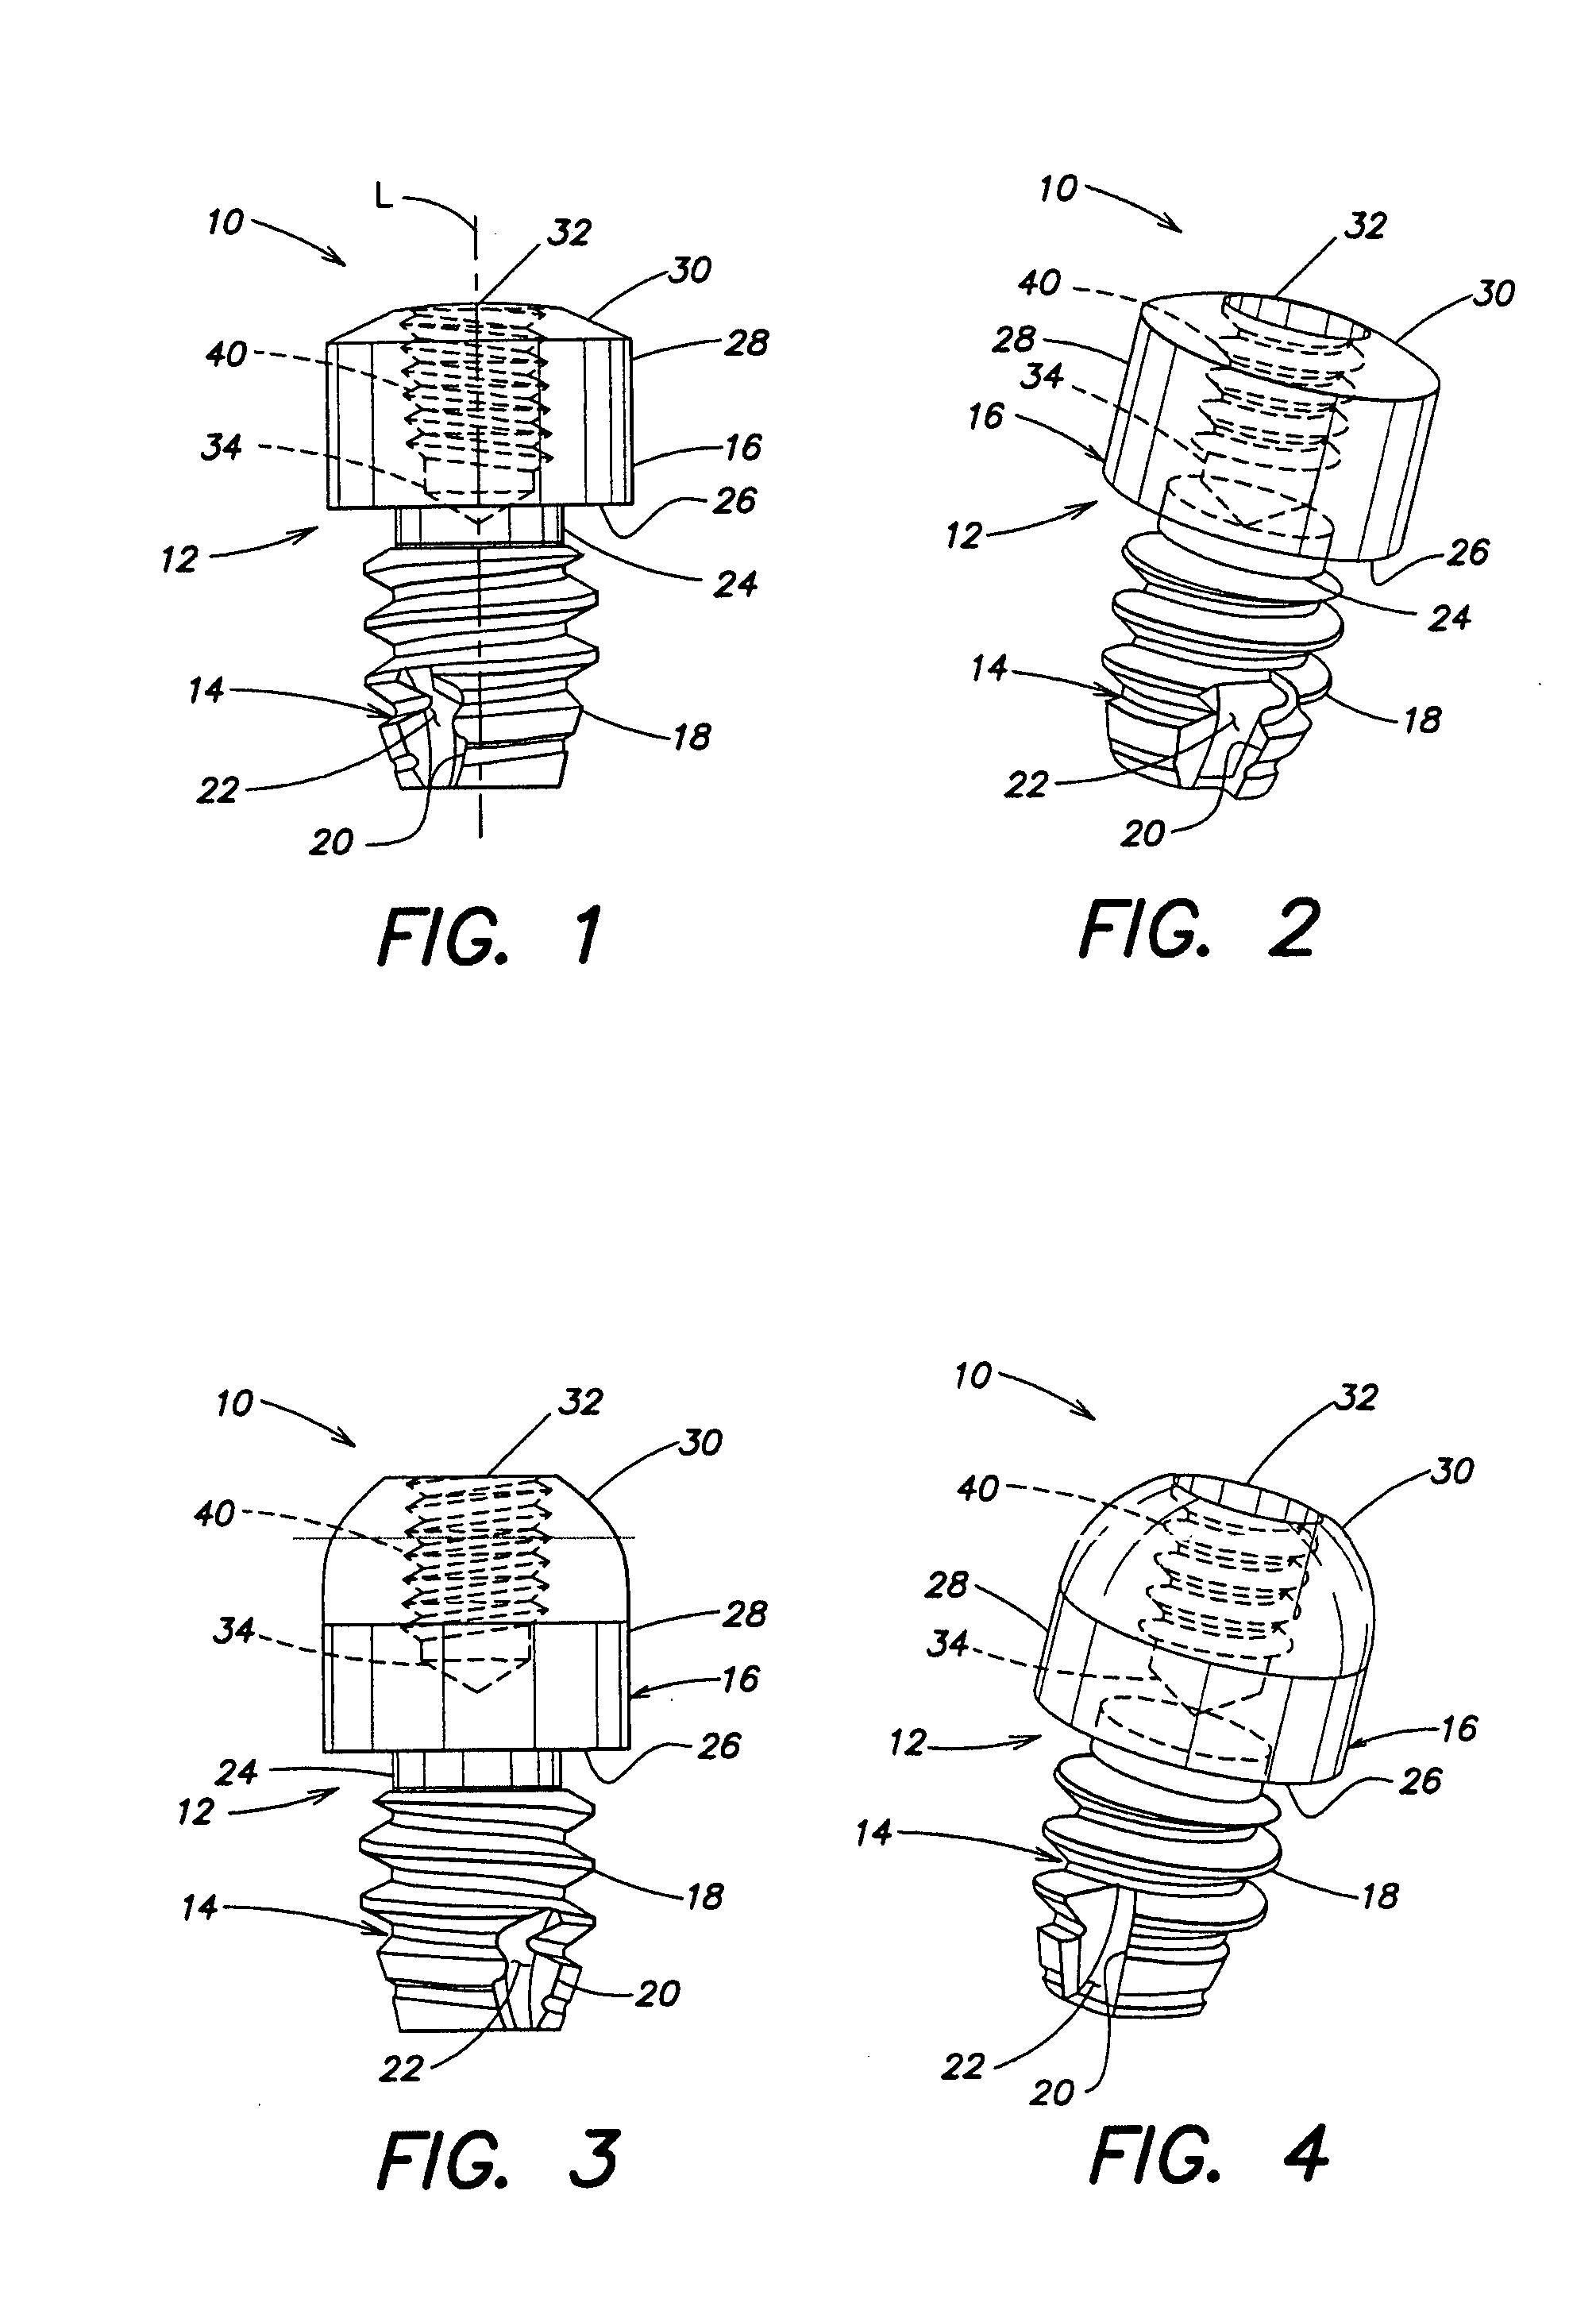 Dental implant for supporting a dental prosthesis